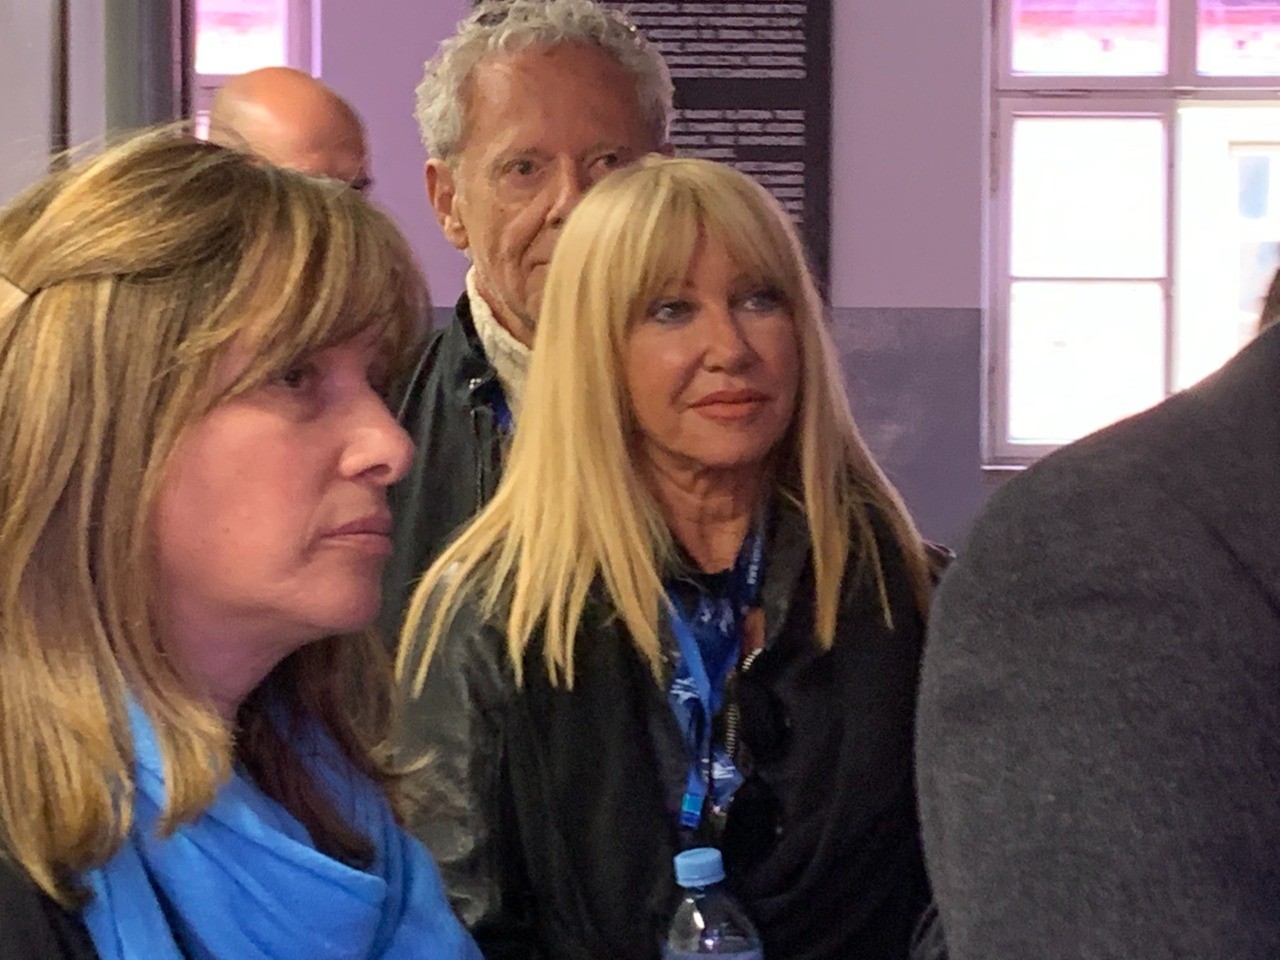 Actress Suzanne Somers joined the first-ever U.S. delegation to the March of the Living annual Holocaust memorial at Auschwitz (Joel Pollak/Breitbart News).